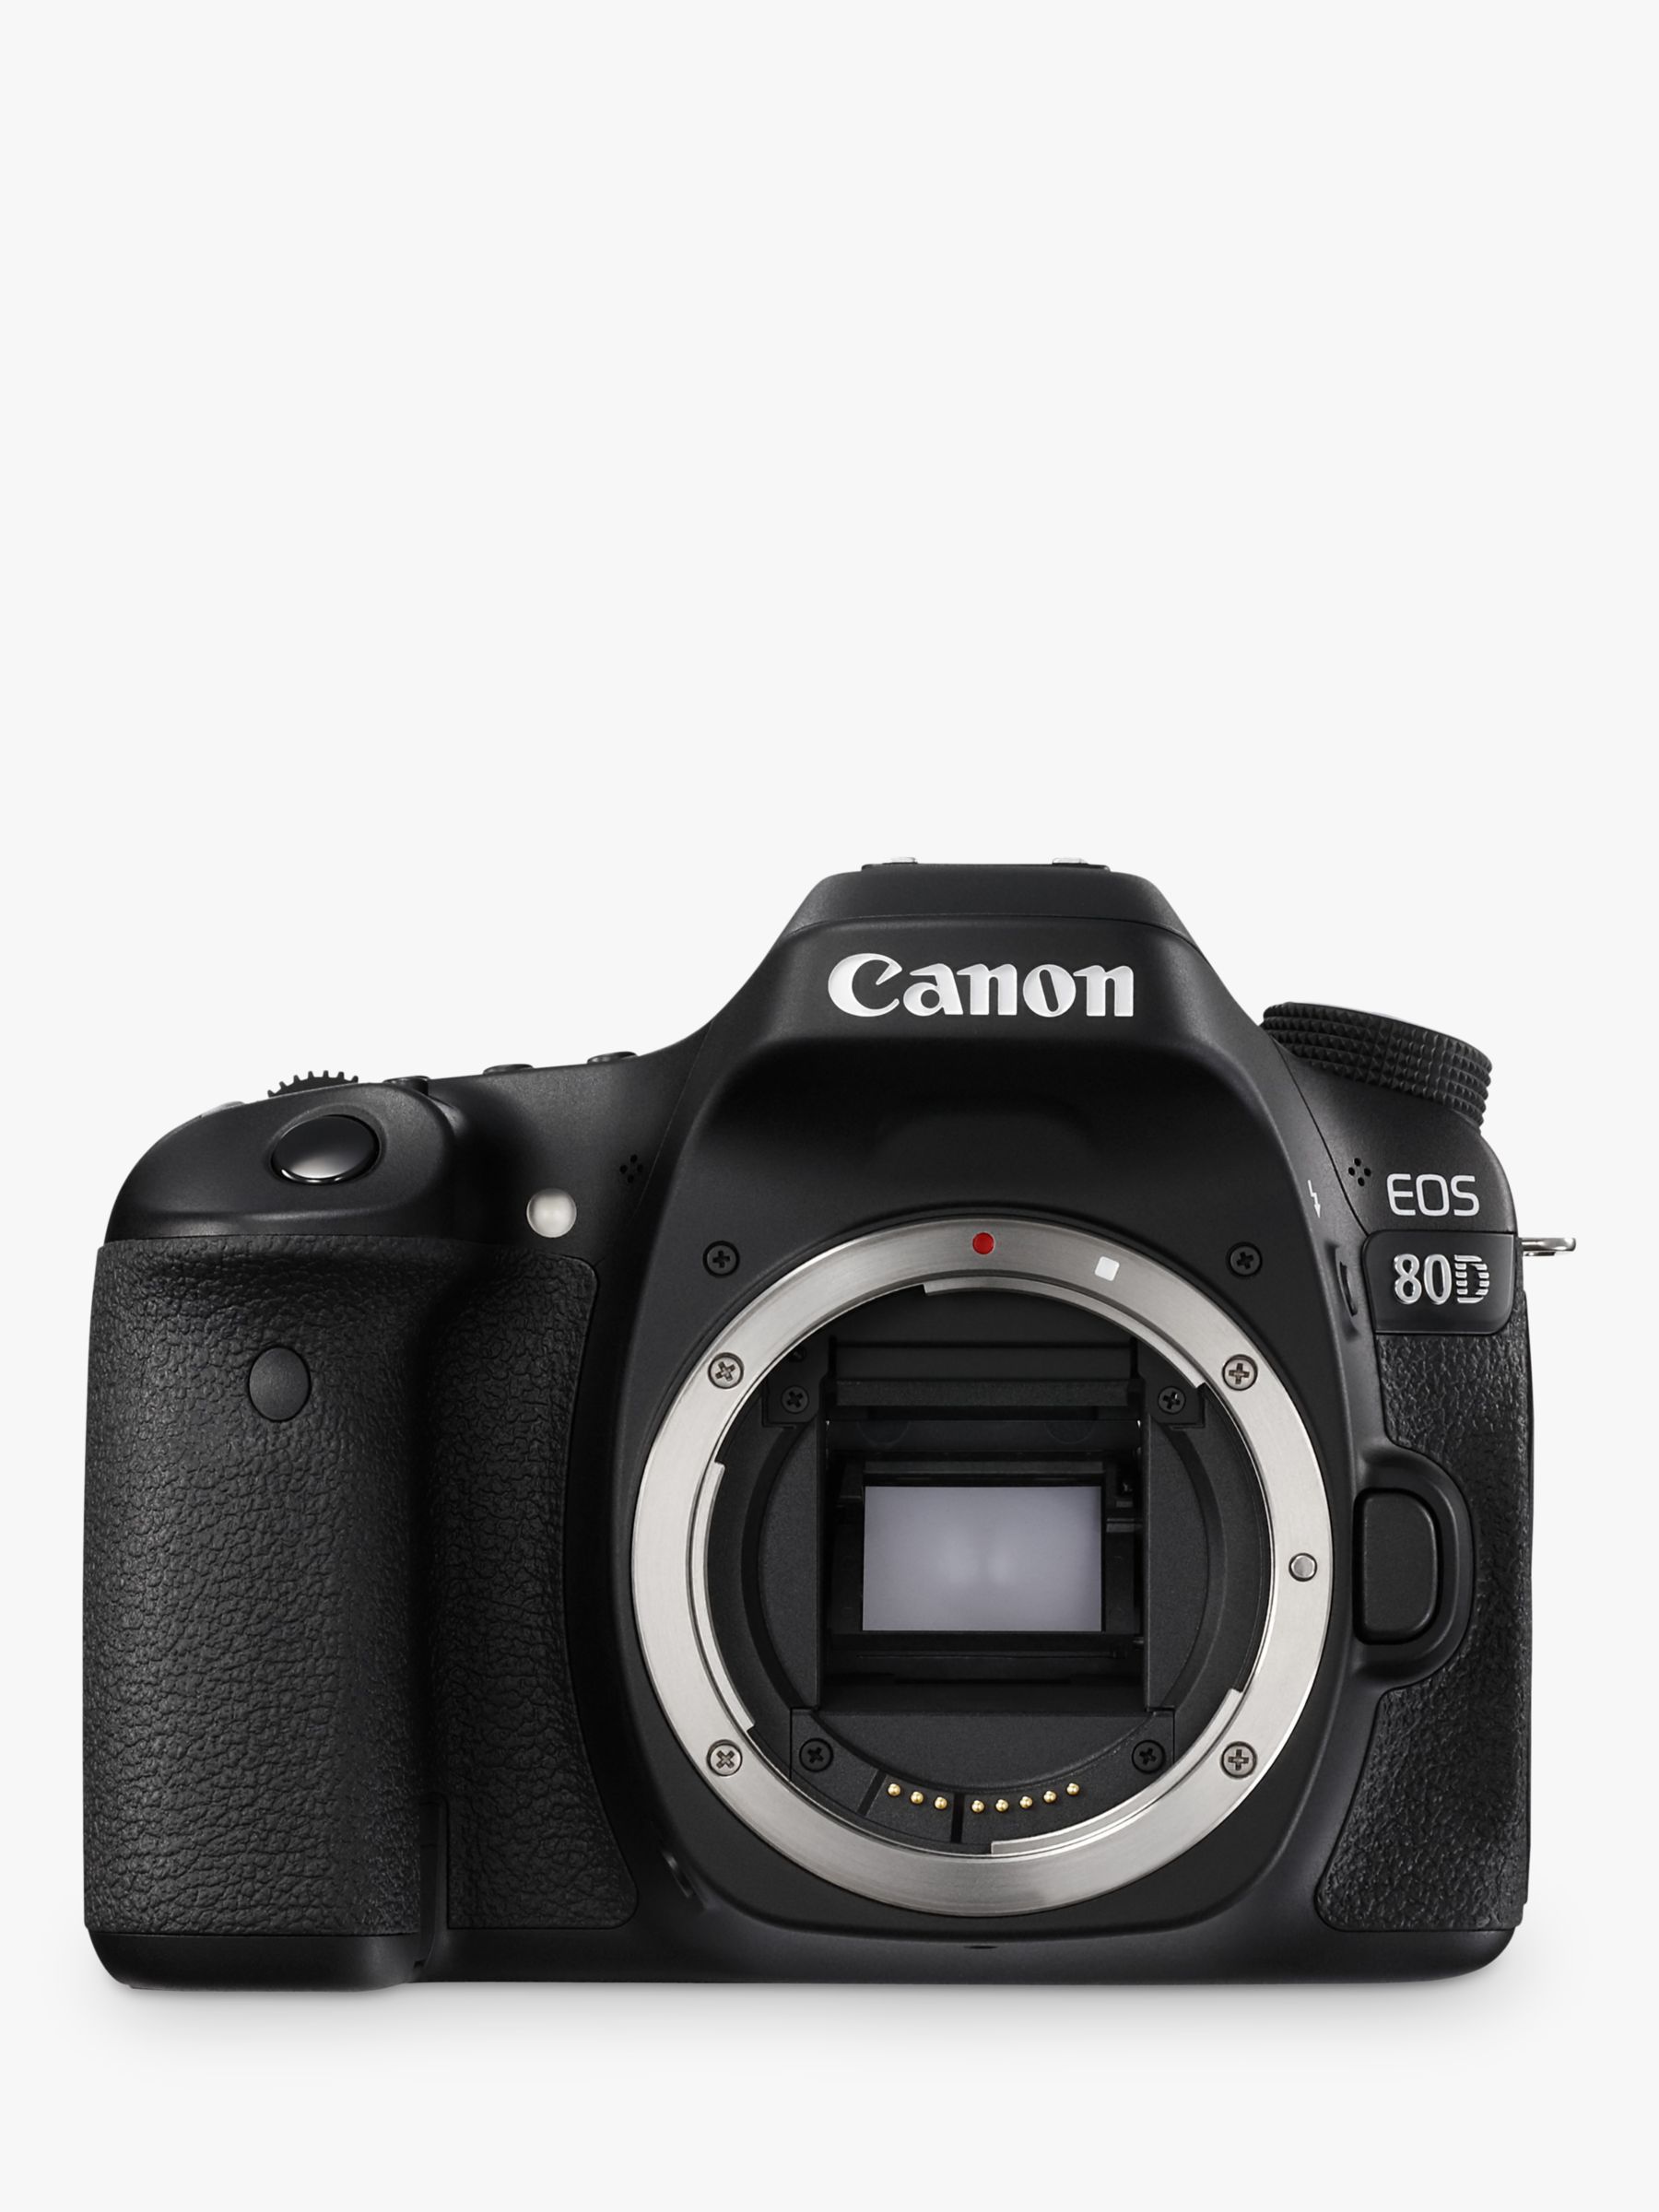 Canon EOS 80D Digital SLR Camera, HD 1080p, 24.2MP, Wi-Fi, NFC With 3 Vari-Angle Touchscreen, Body Only